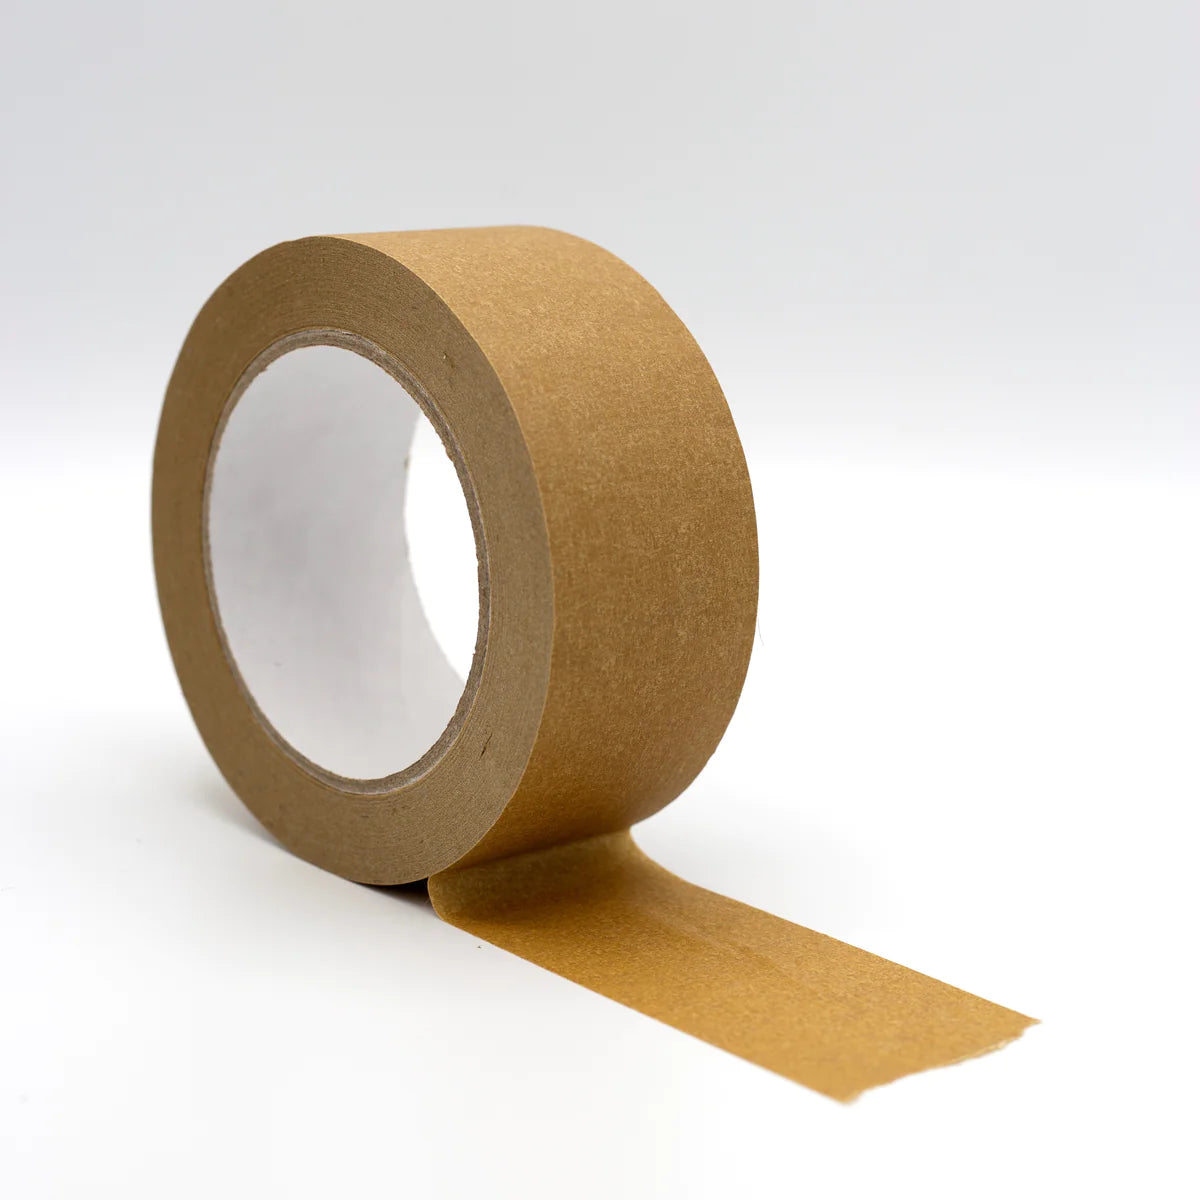 Paper Tape - 50mm x 50m - The Plastic Free Co.